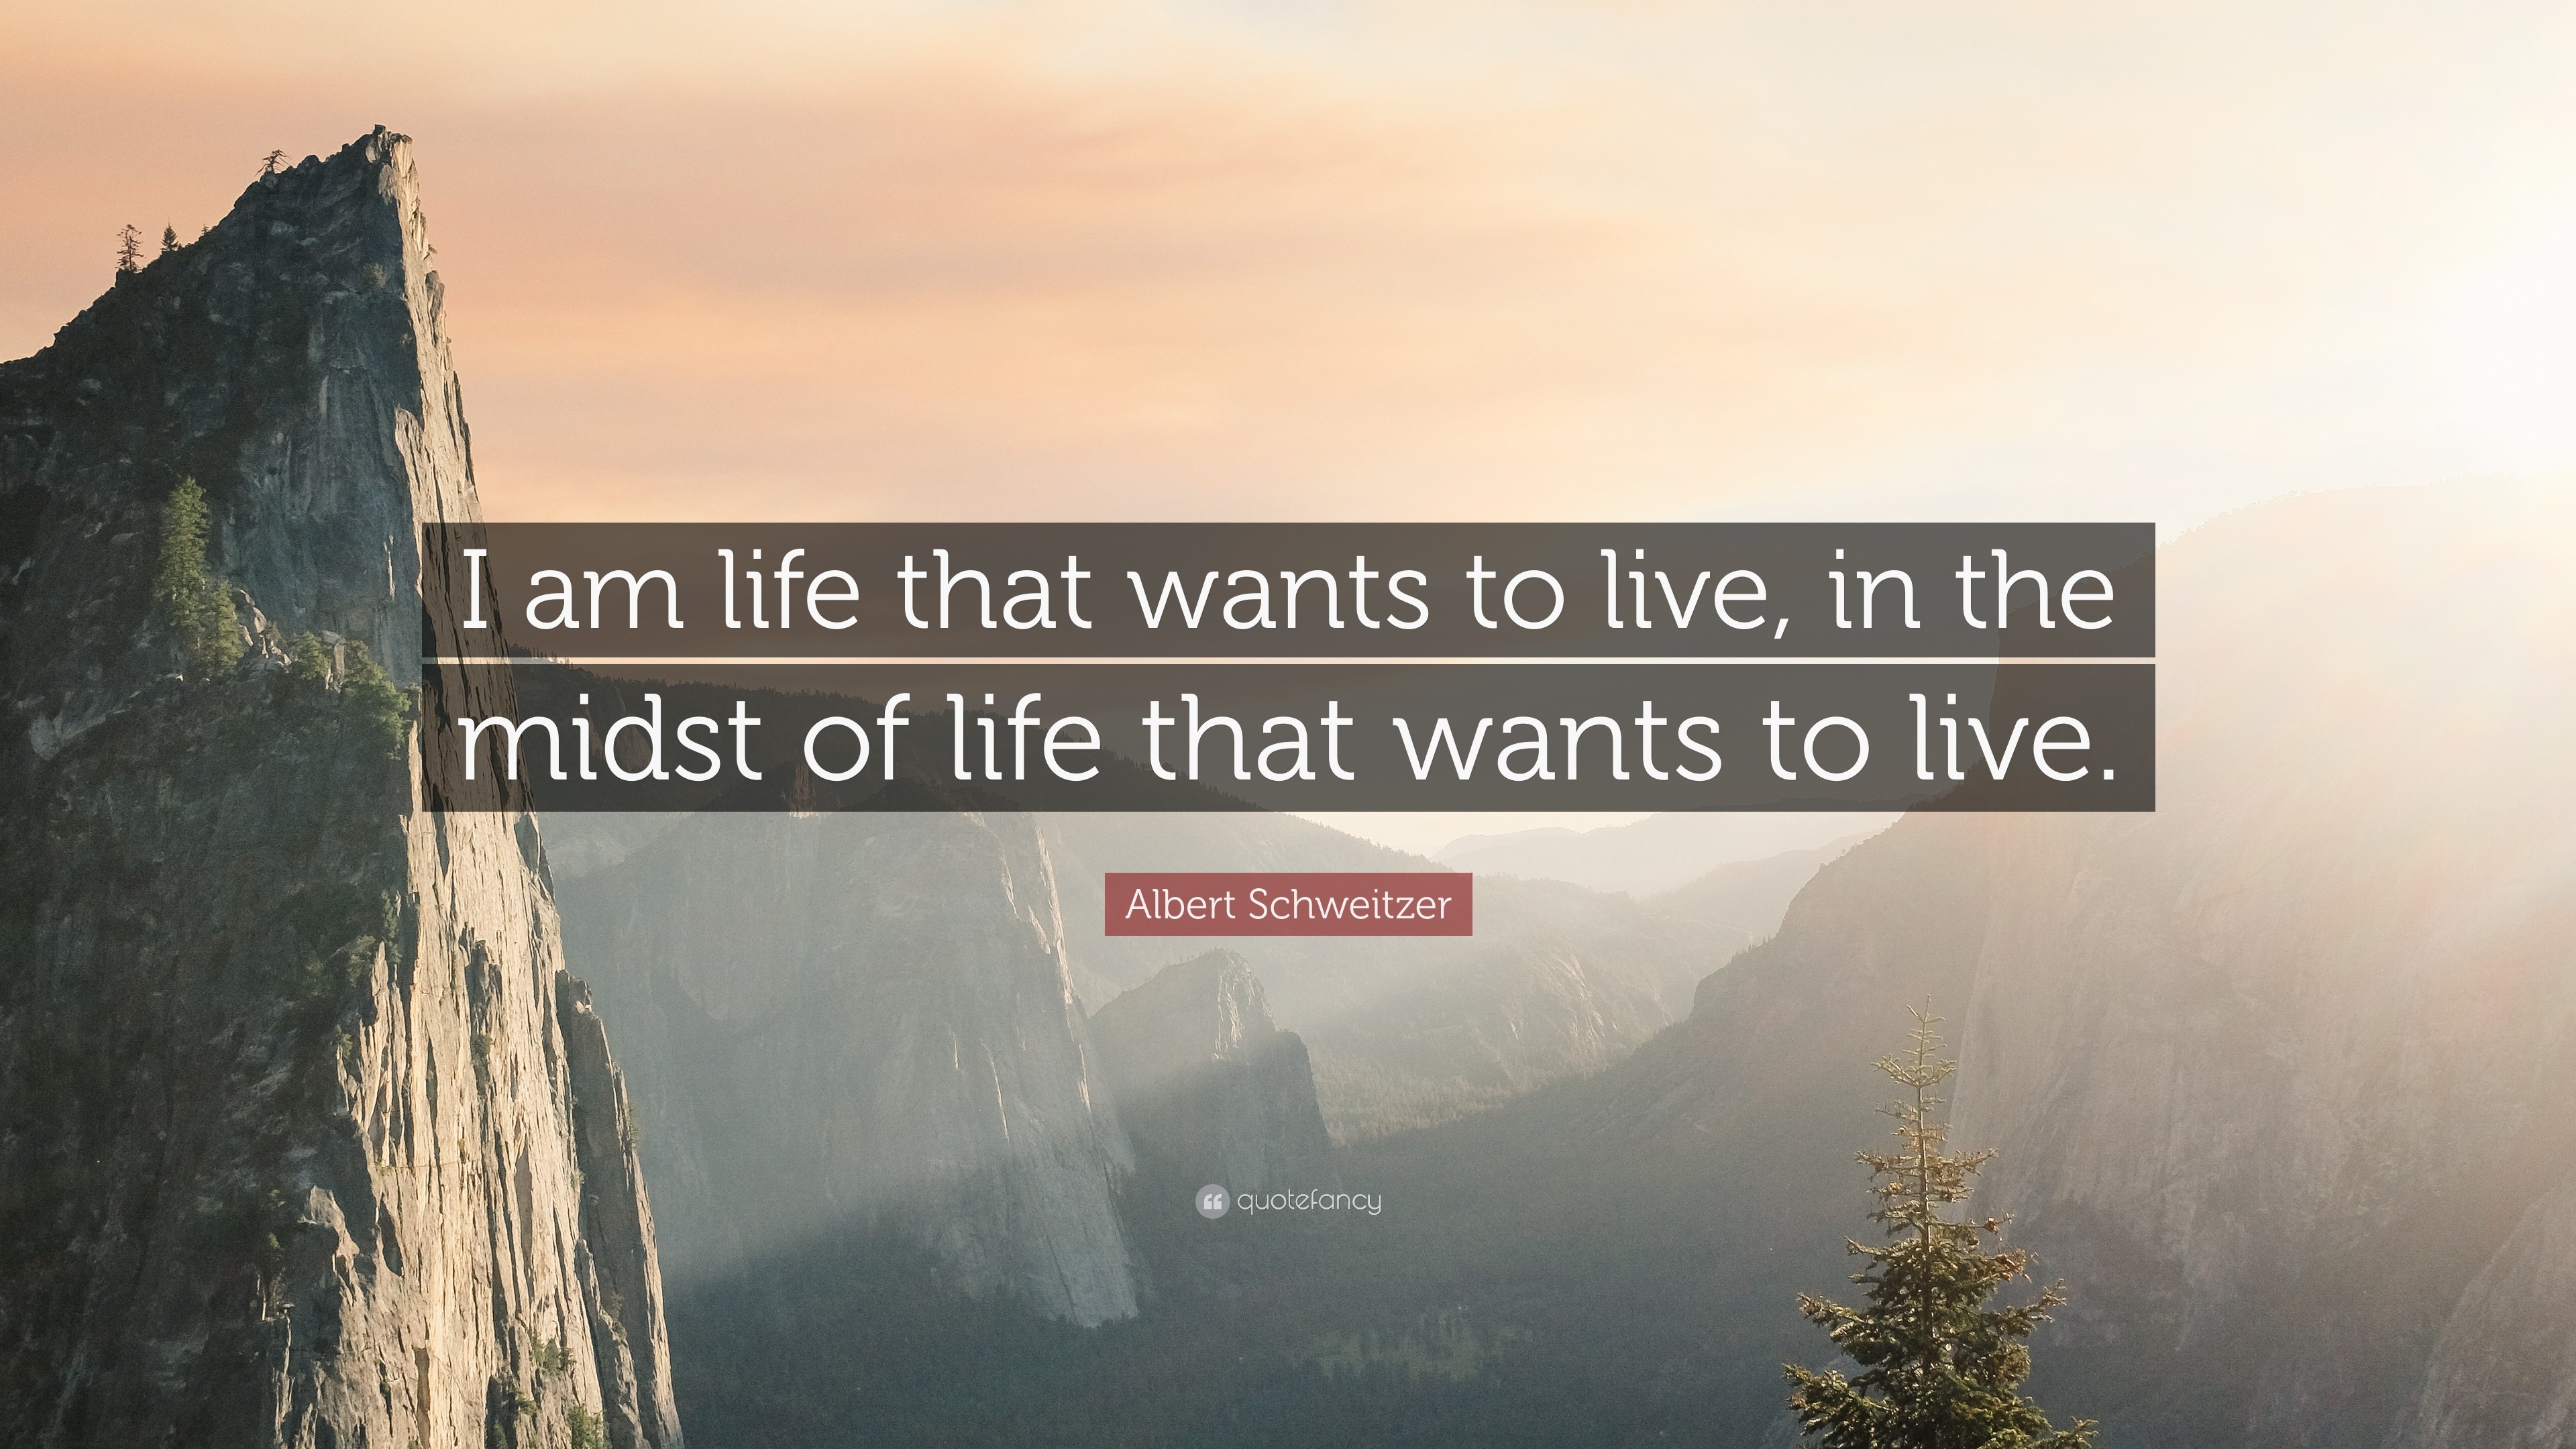 My Life and Thought by Albert Schweitzer